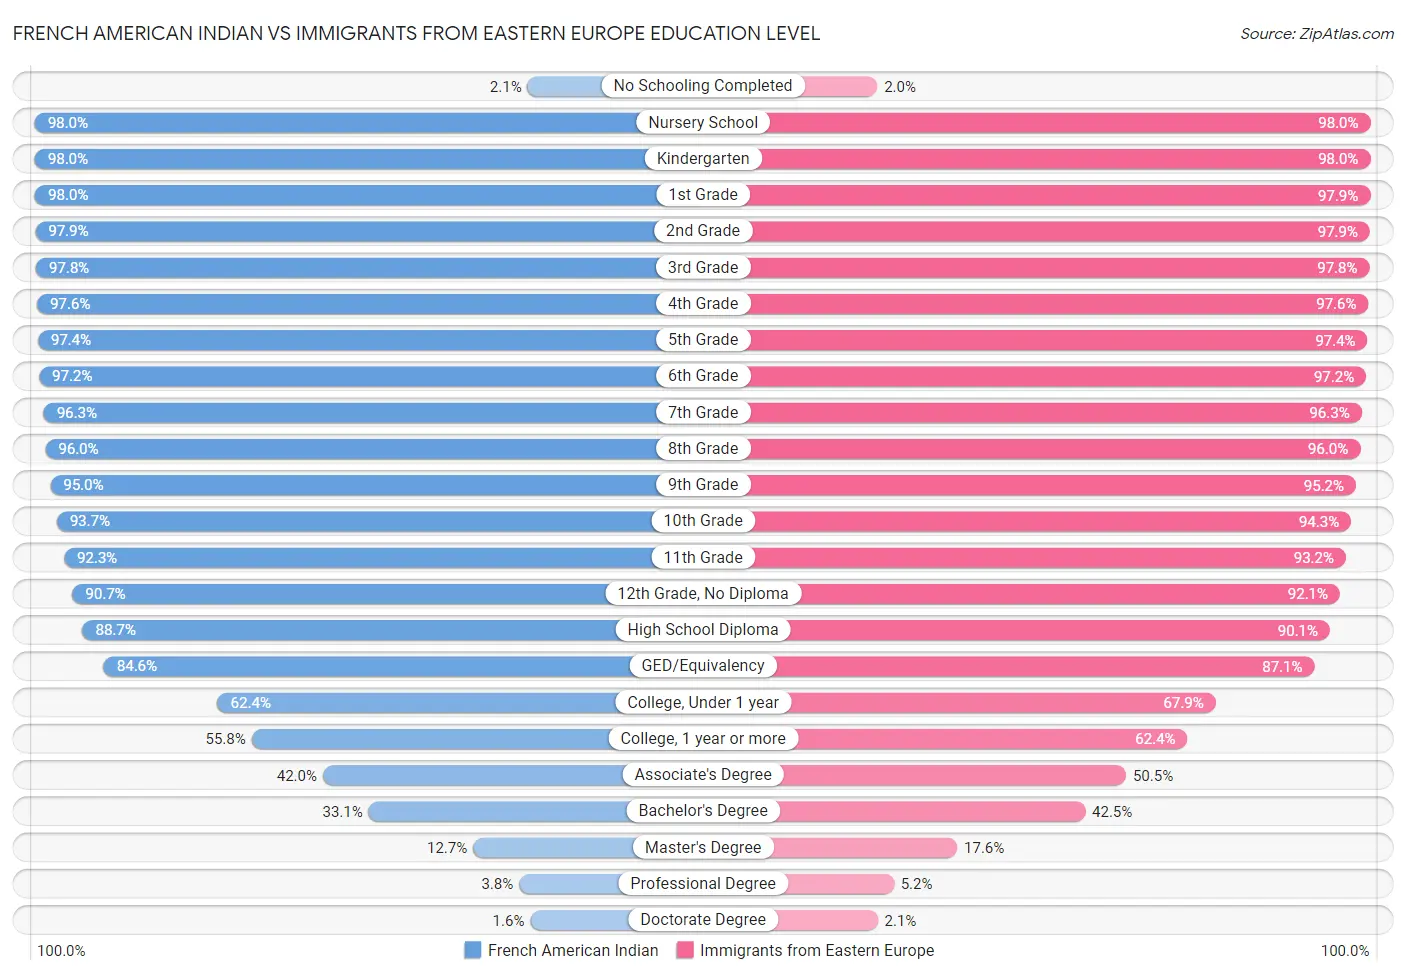 French American Indian vs Immigrants from Eastern Europe Education Level